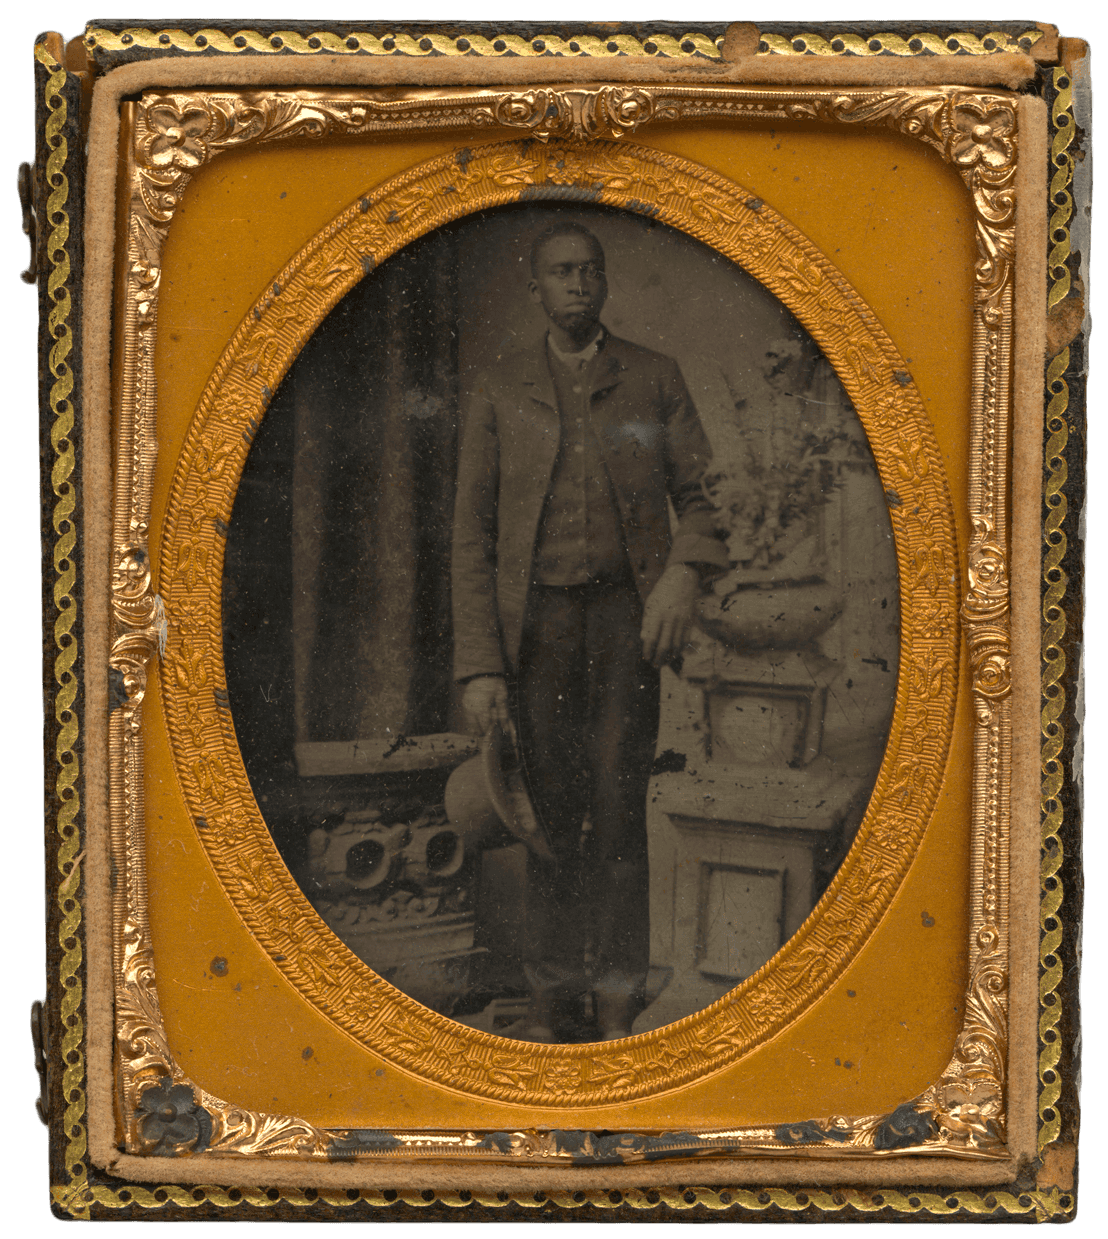 Tintype of a man in a suit. The tintype is housed in a case with decorative gold metal oval frame.